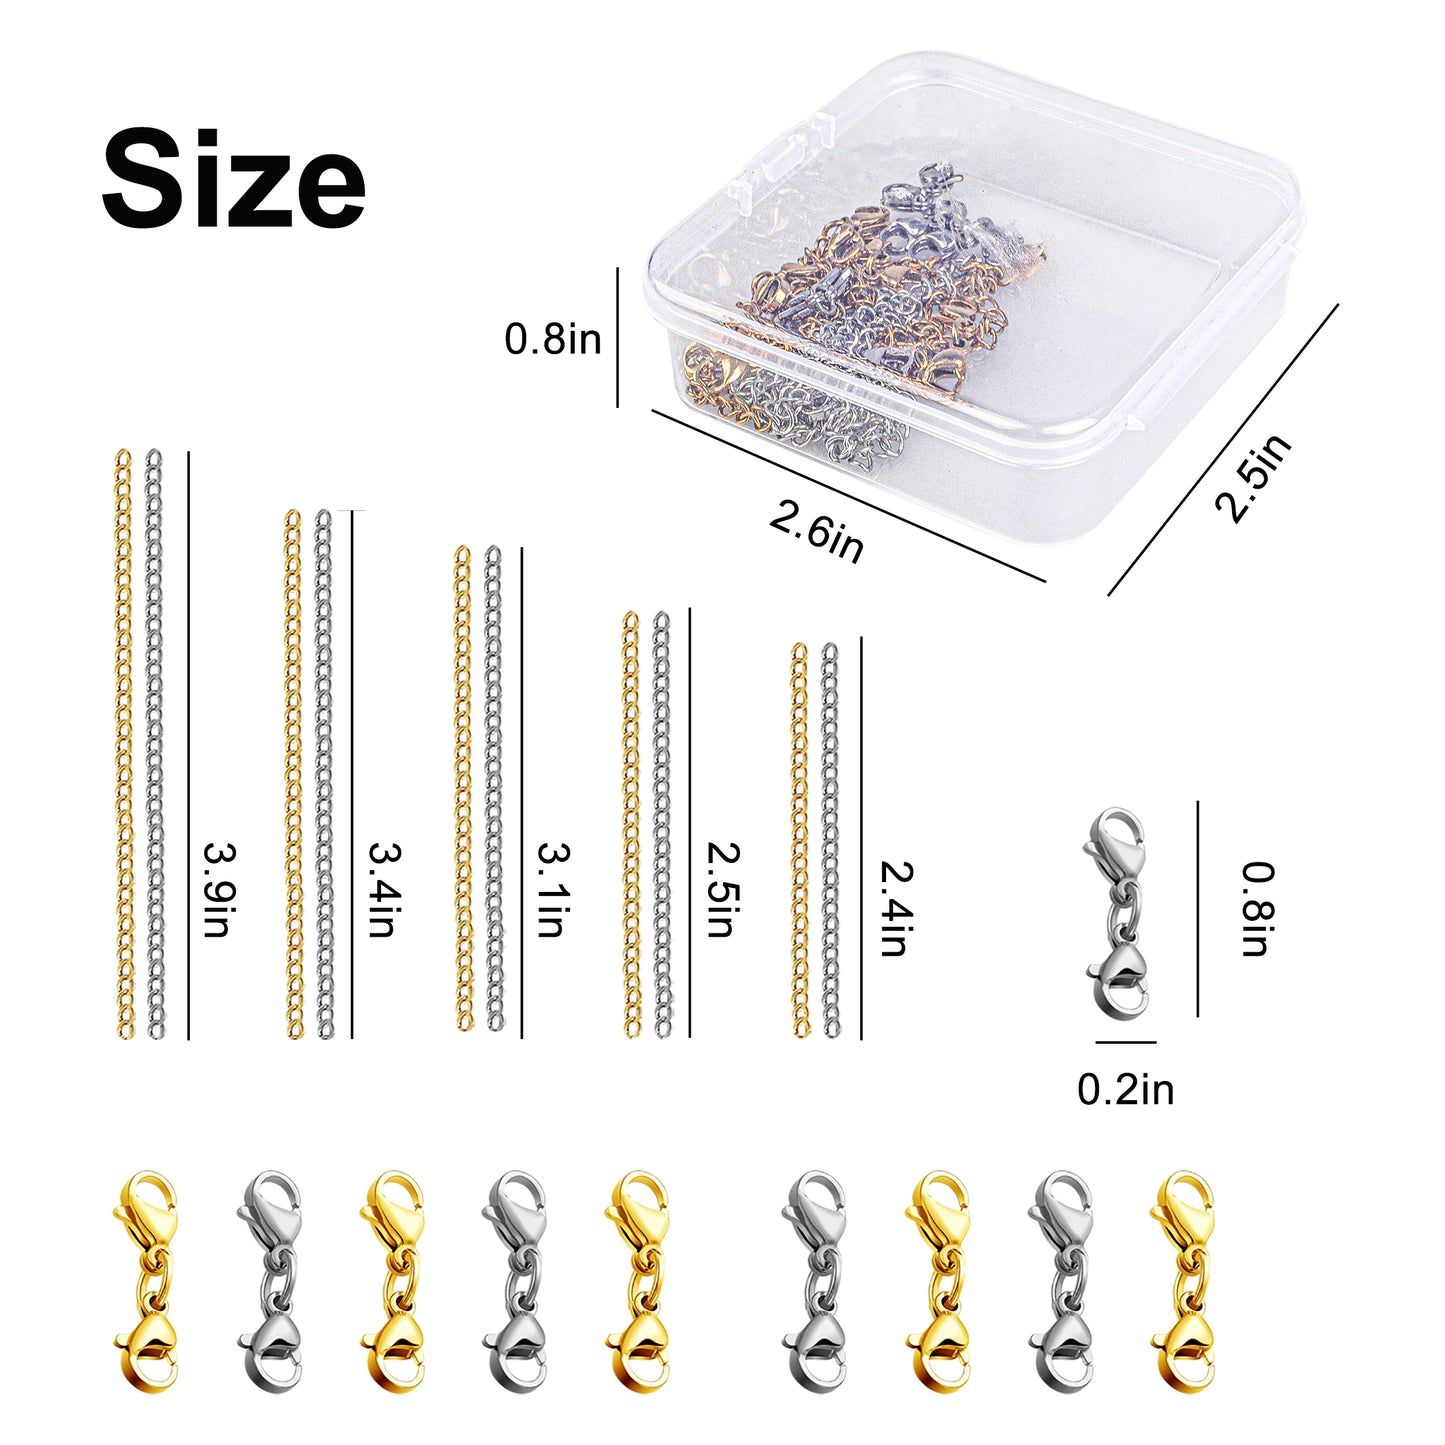 10pcs double-ended movable buckle and 10pcs Necklace Extenders - necklace buckle with storage box,Double Lobster Clasp Extender Gold Silver Lobster Claw Clasps Bracelet Extender Clasp for DIY Jewelry Making